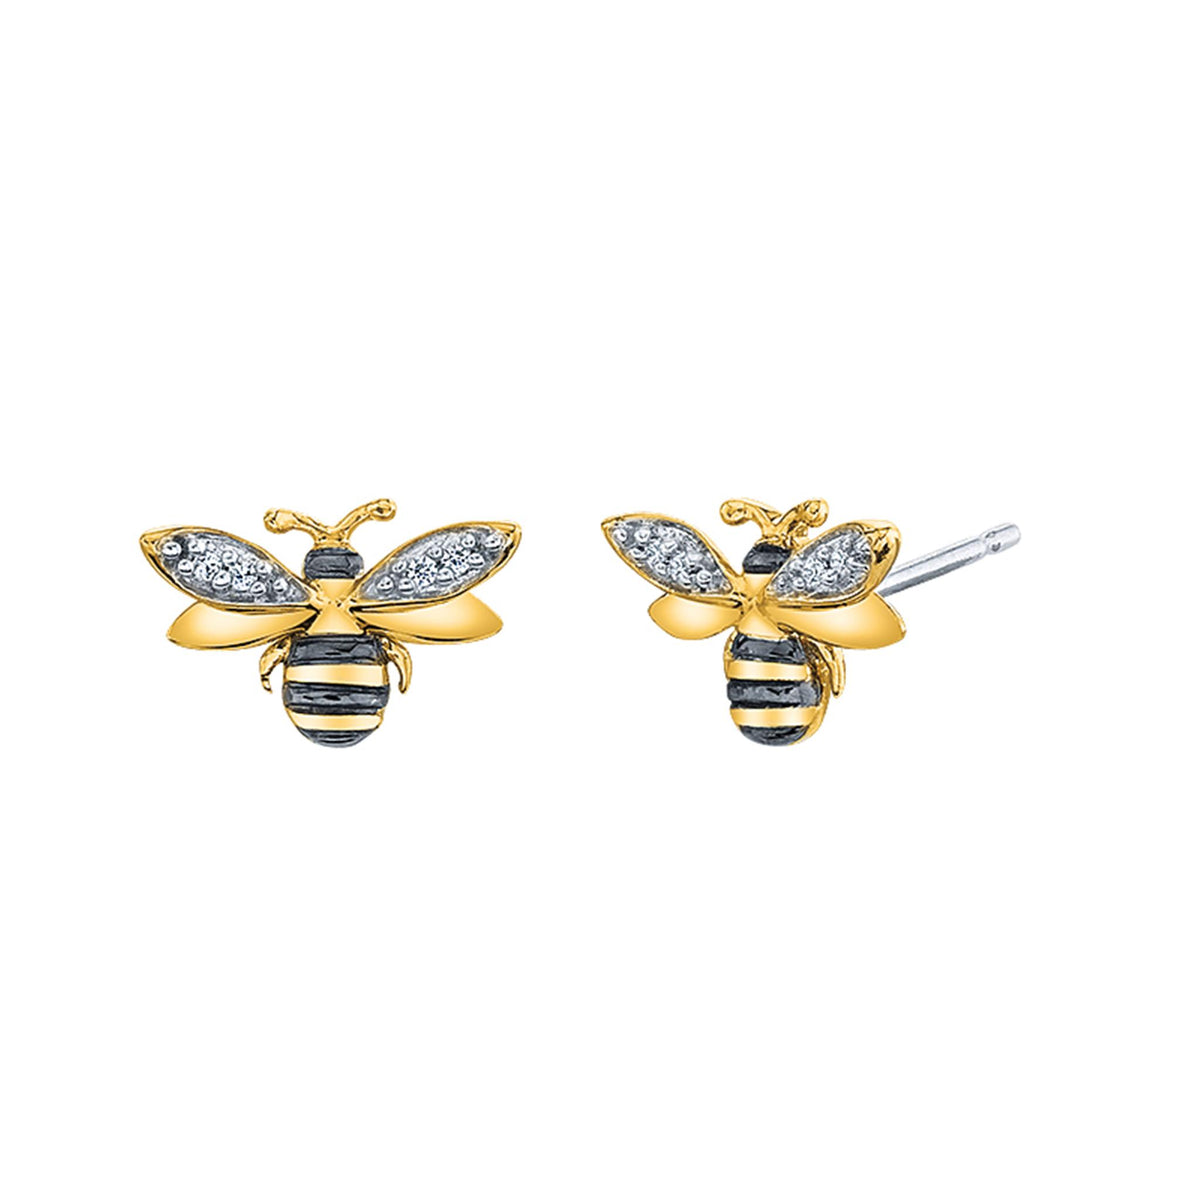 Sterling Silver 14kt Yellow Gold Plated and Black Enamel Bee Stud Earrings with .03cttw Diamond Wings